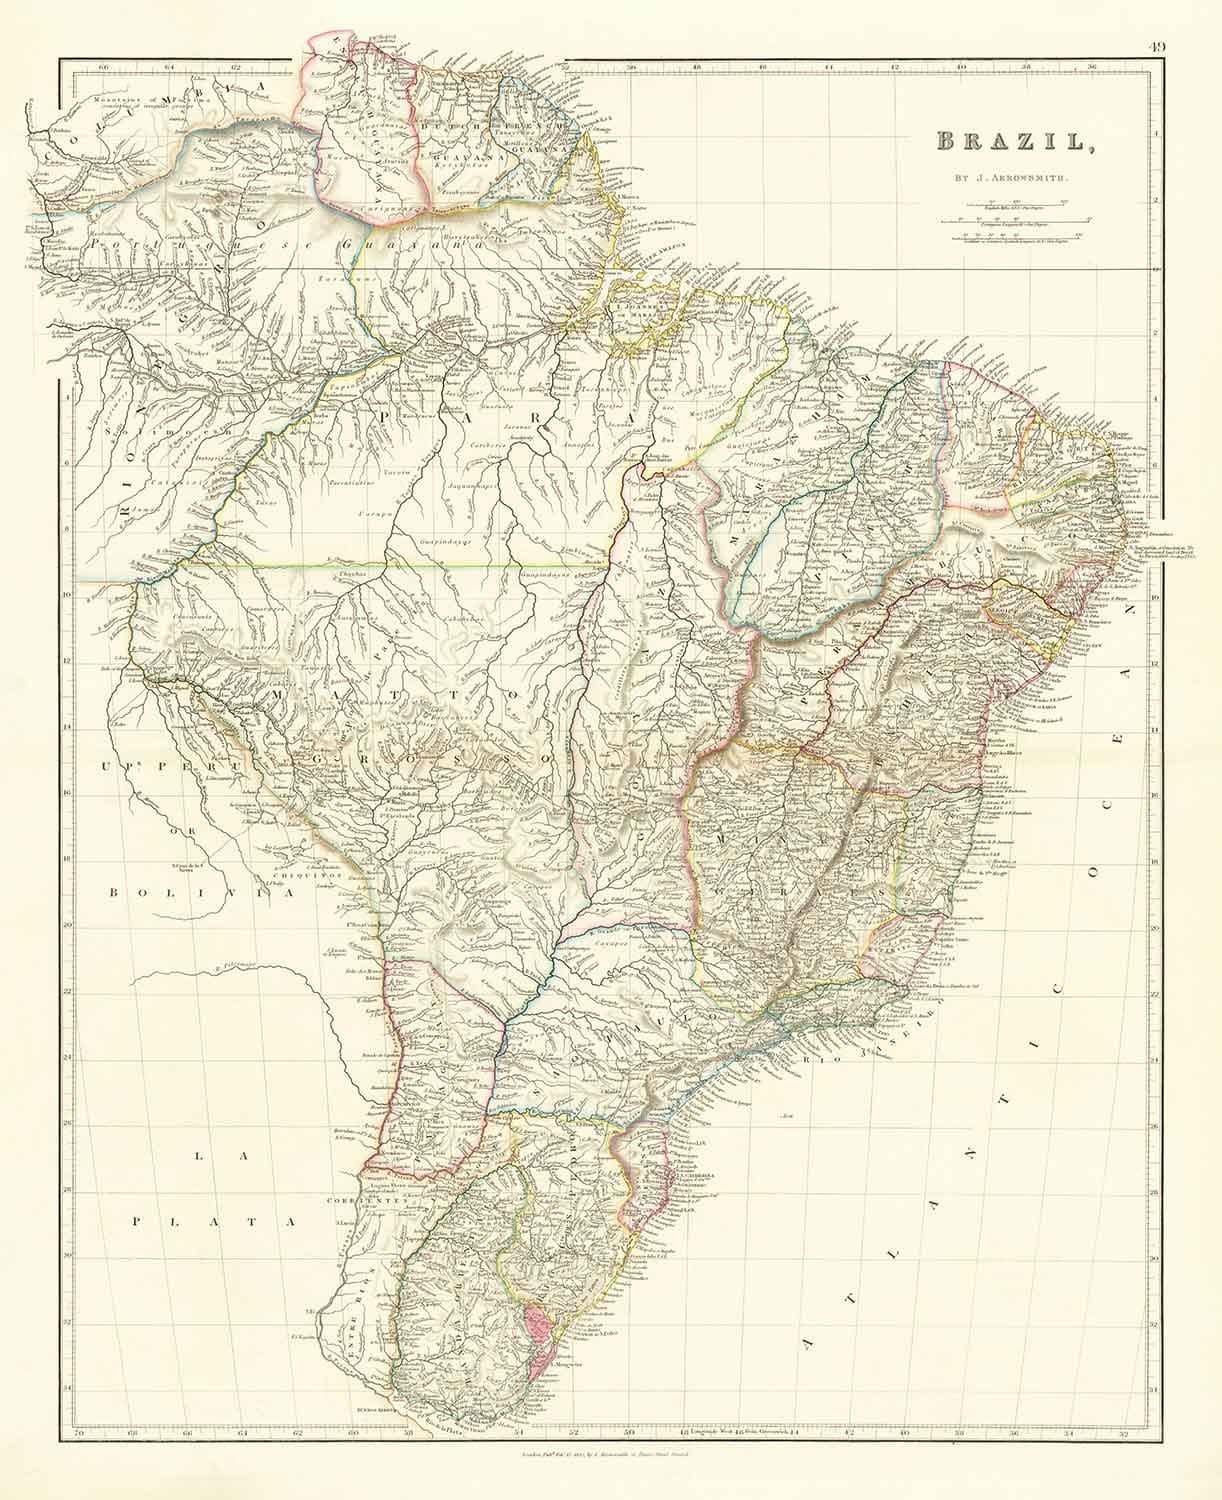 Old Map of Brazil, 1832 by Arrowsmith - Colonial South America - Kingdom of Portugal, Emperor Pedro II, Amazon River